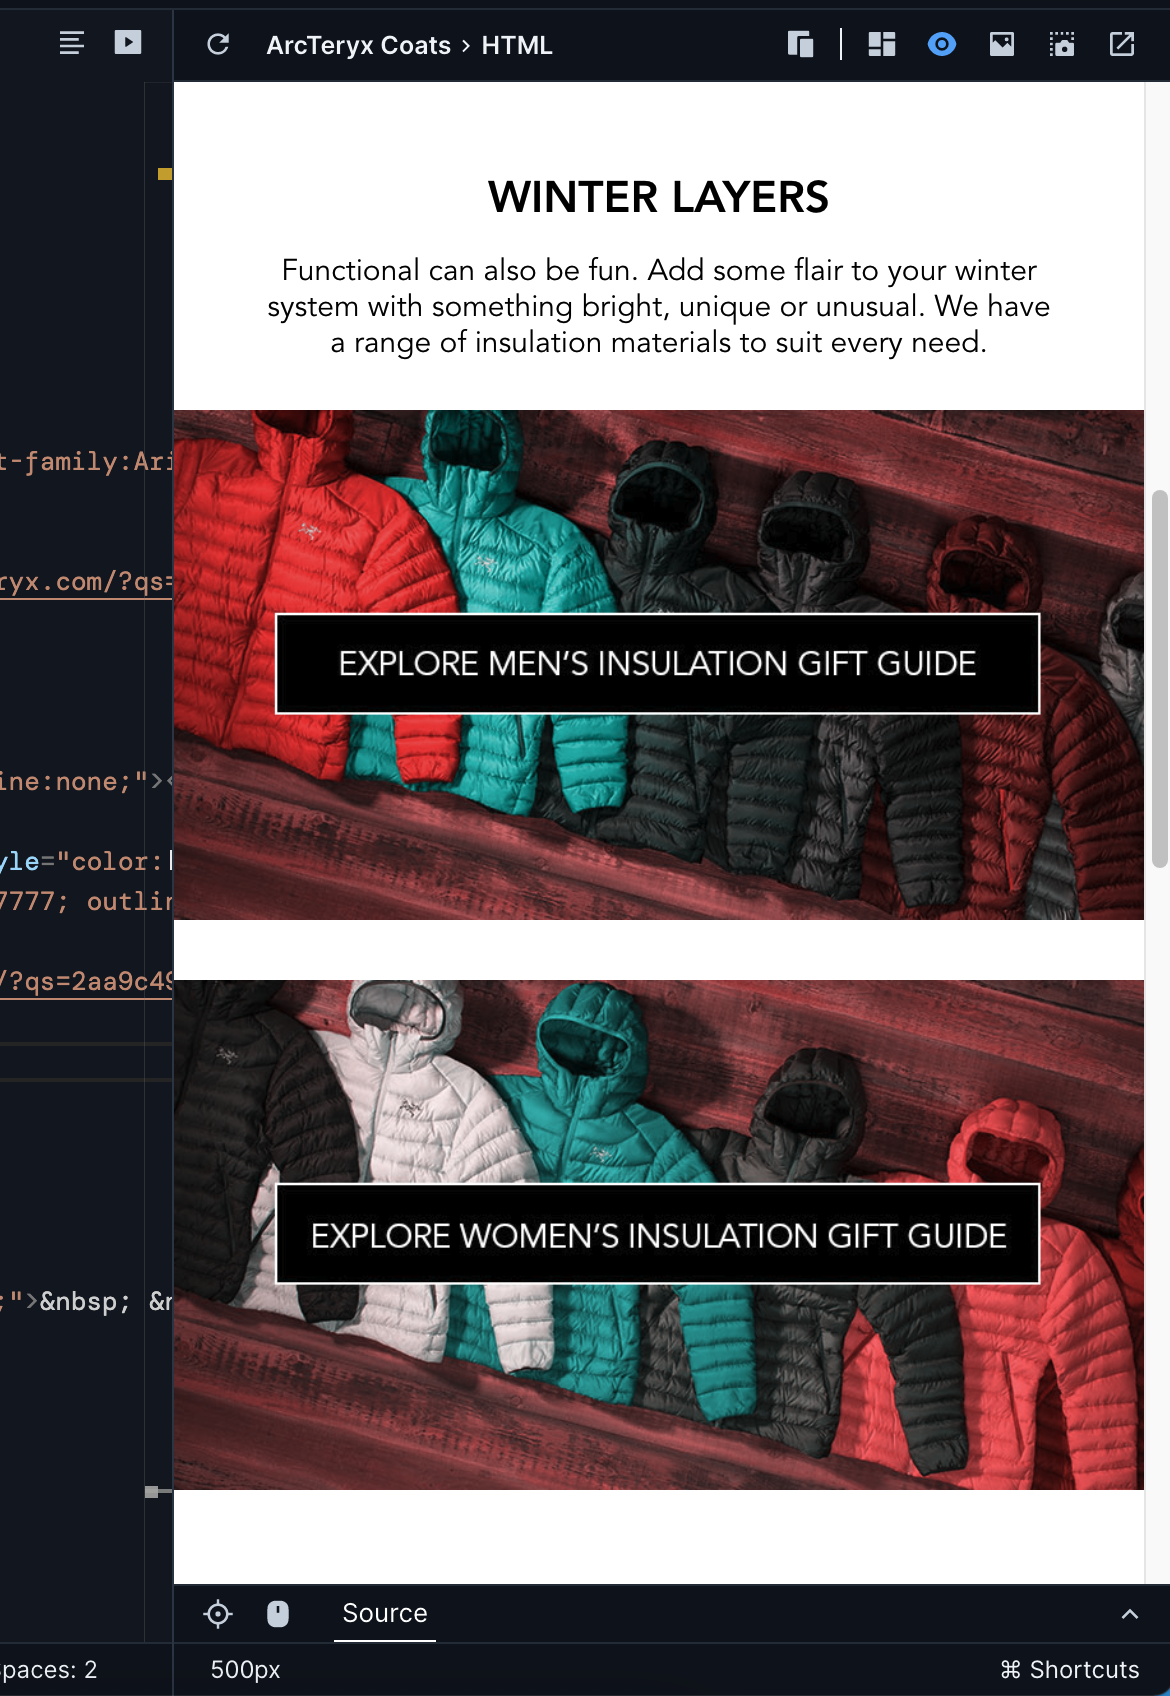 Up close image of the Preview, showing the same email advertising winter jackets. The jackets in the first image now appear red, teal, dark gray, gray, red, and gray. The jackets in the second photo now appear black, white, teal, dark grey, pink, and red.